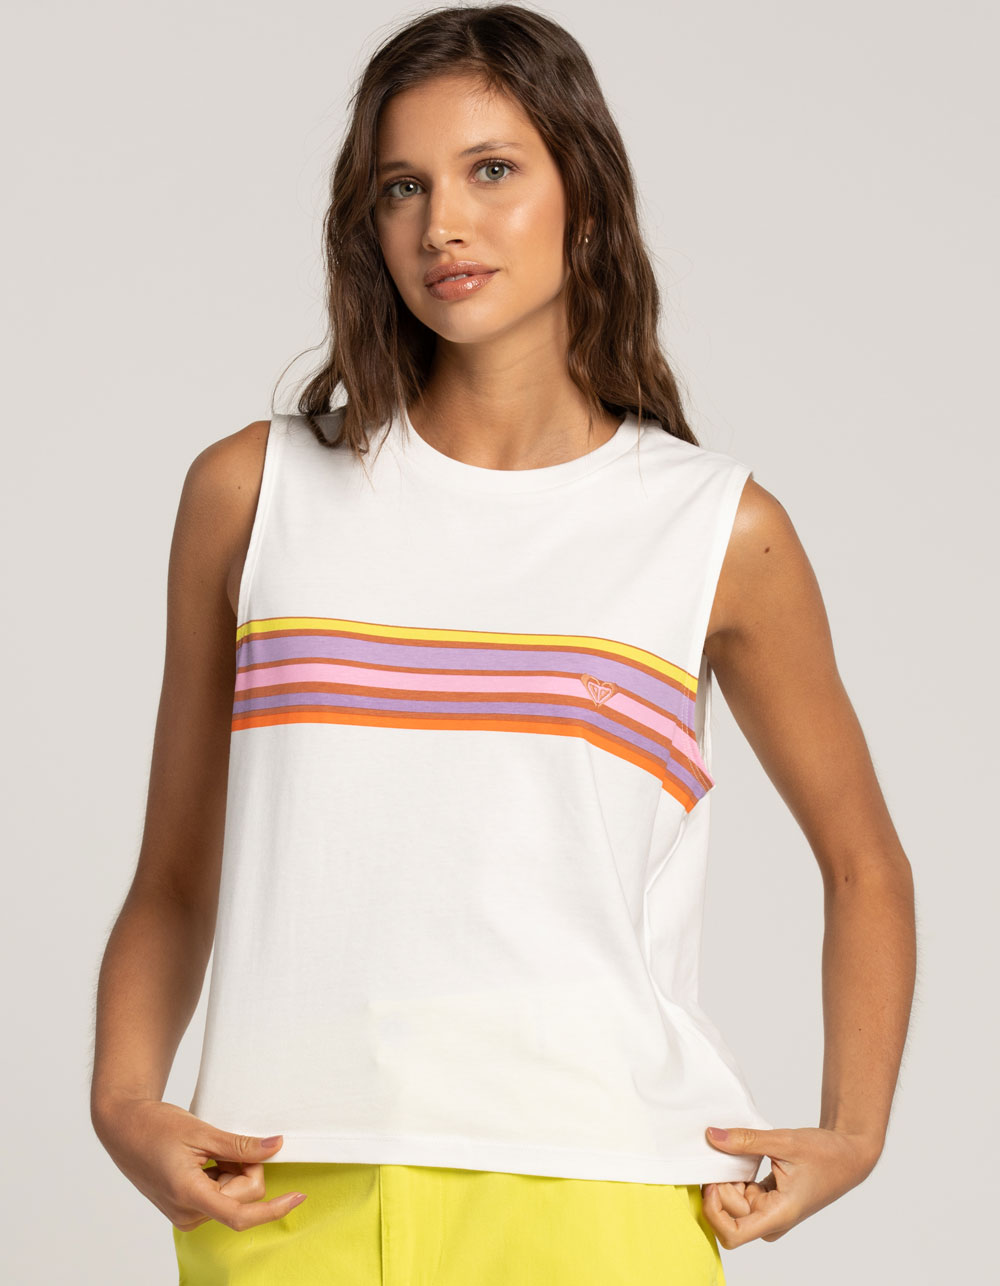 ROXY x Kate Muscle Bosworth Kind Tee WHITE Tillys Surf - Womens | Kate